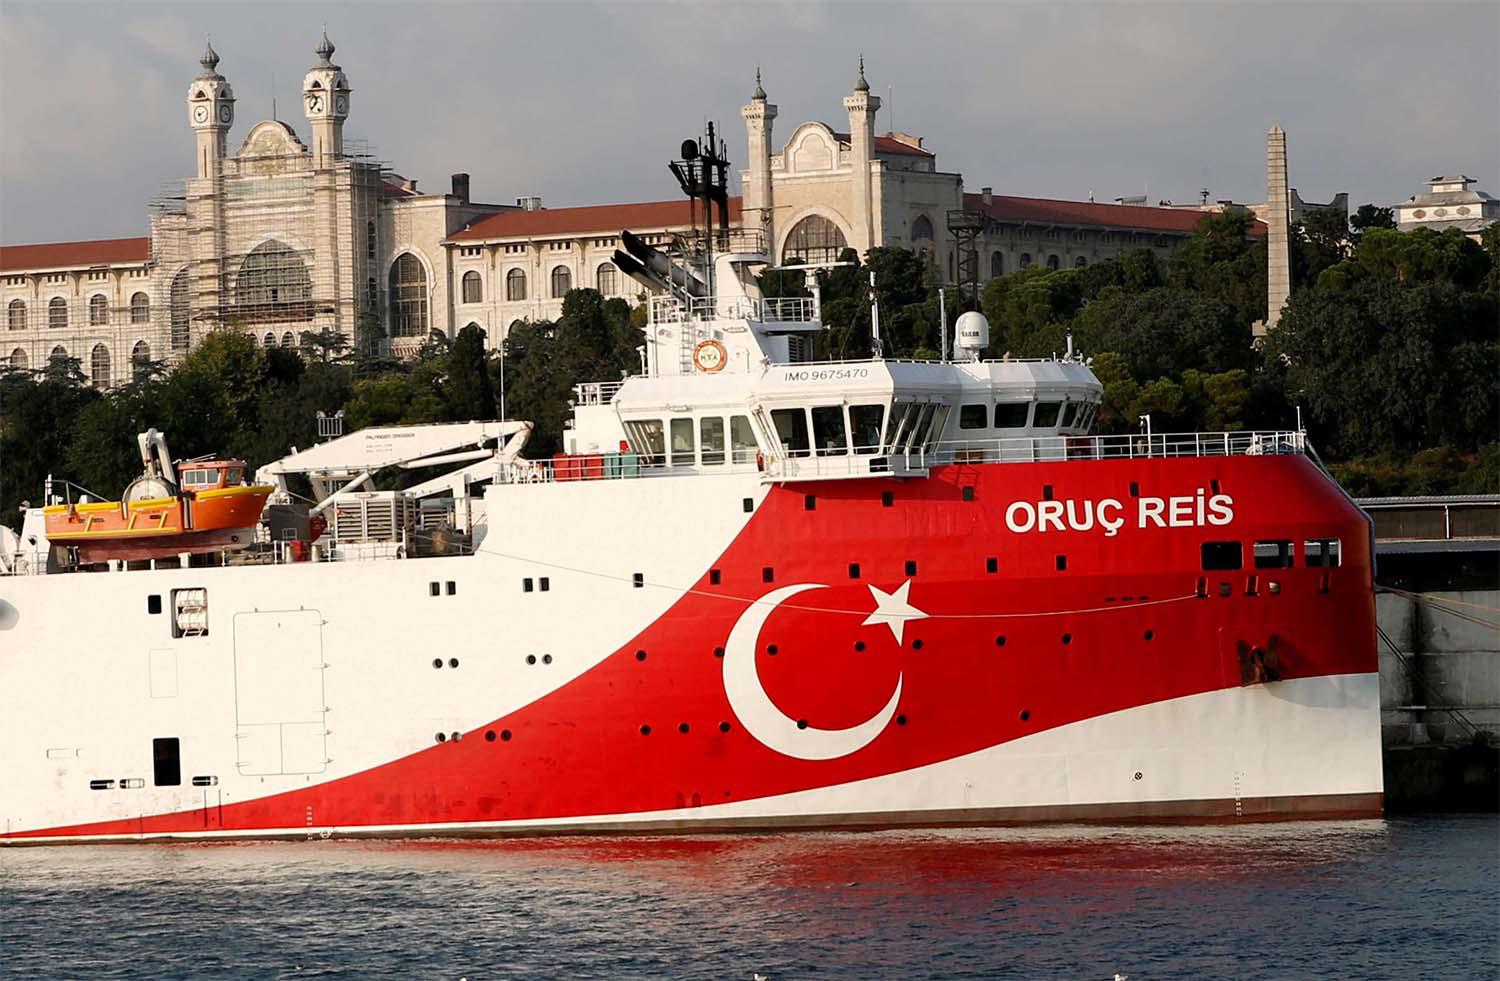 Cyprus is frustrated that Turkey has sent another vessel to Cyprus's economic zone to conduct seismic surveys